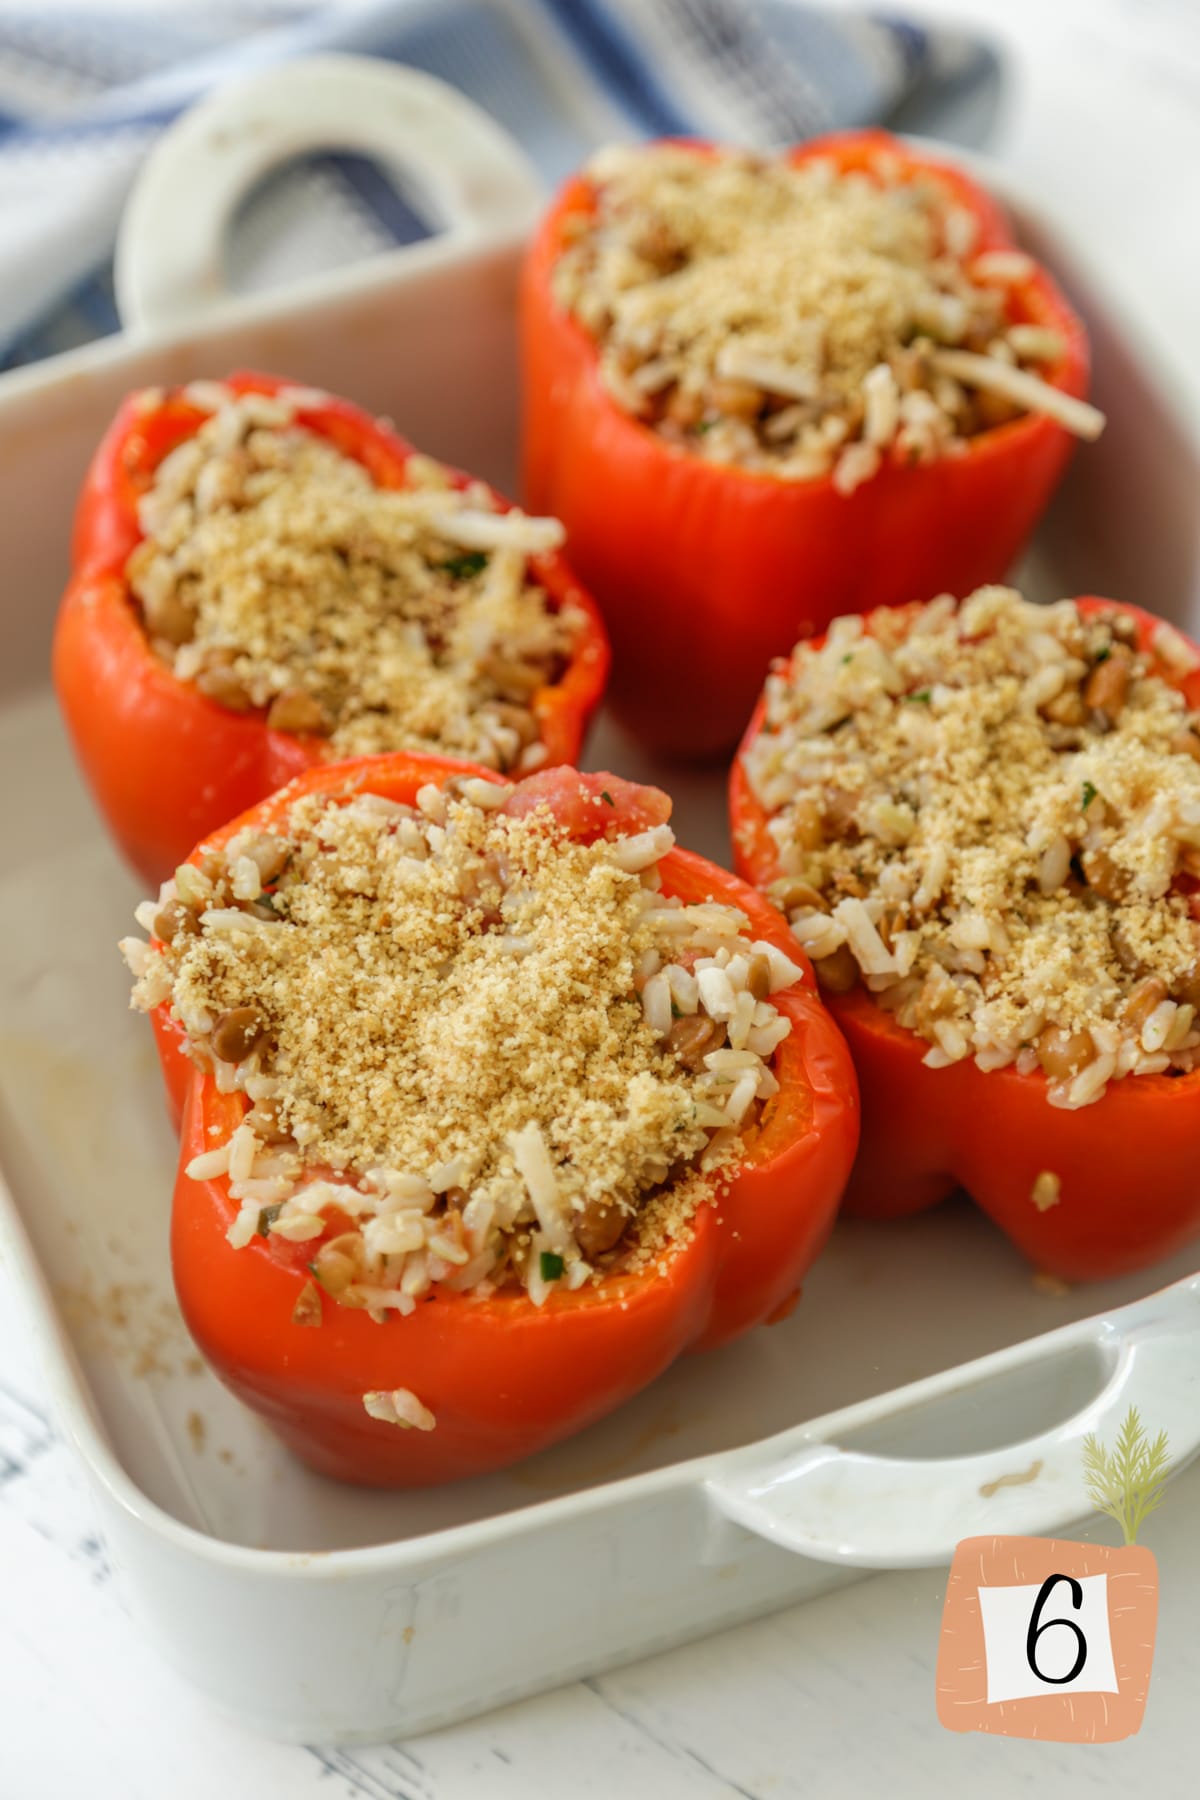 Stuffed peppers in a white baking dish before baking.